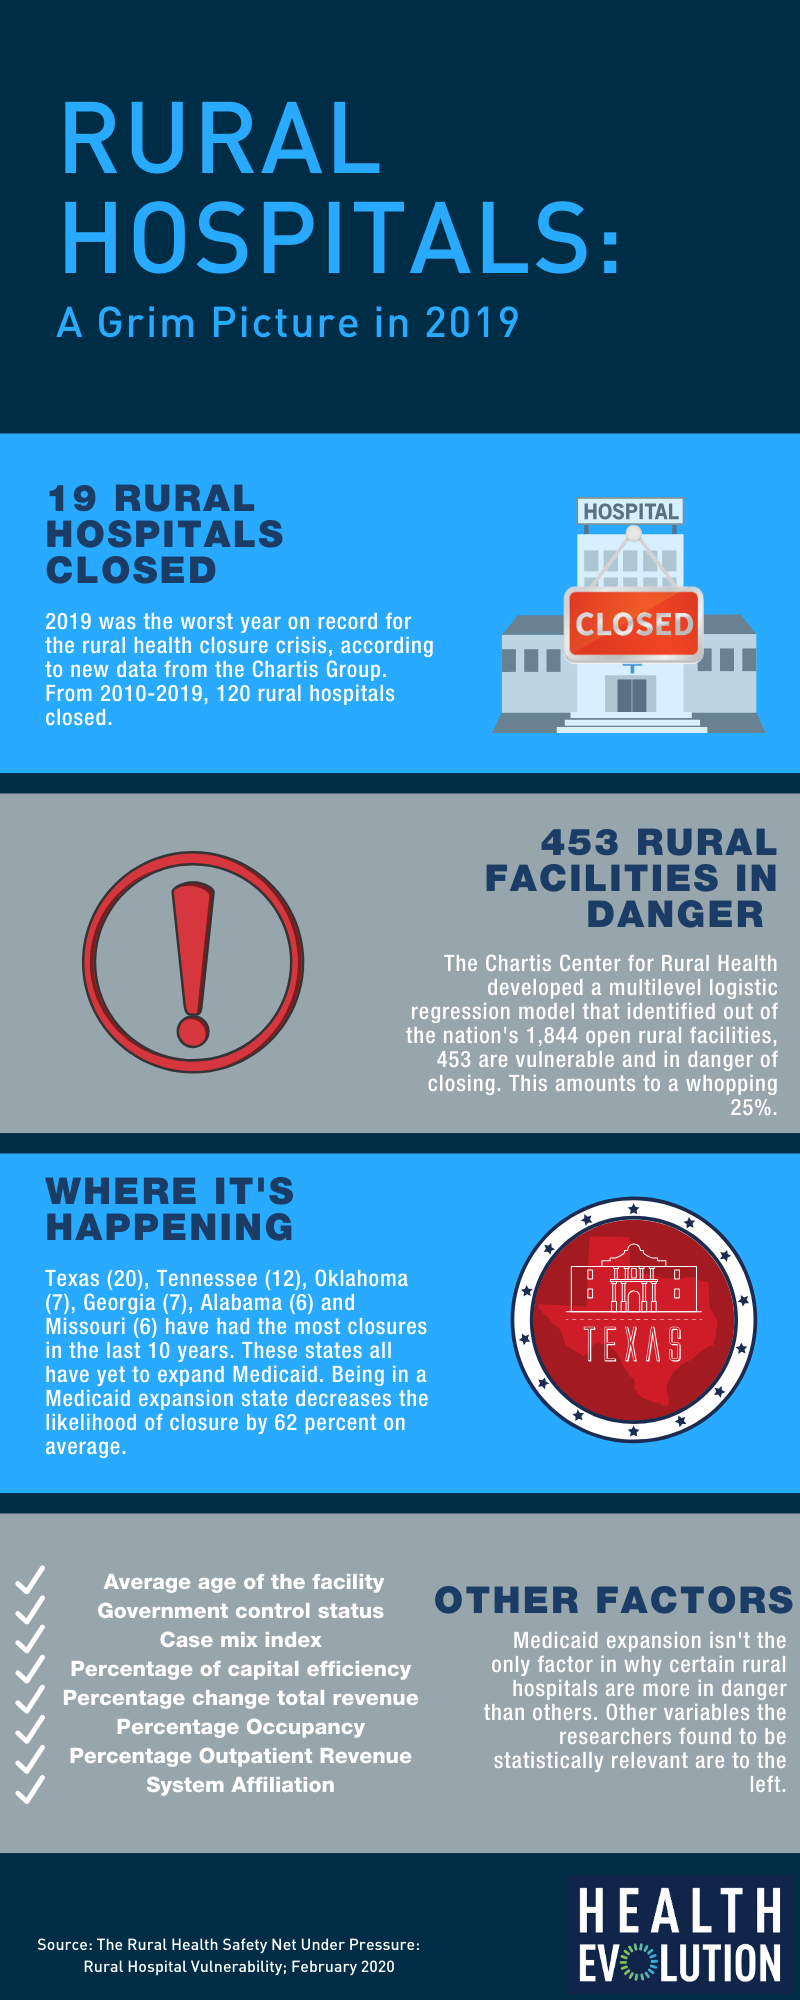 Rural hospitals are facing more closures than ever